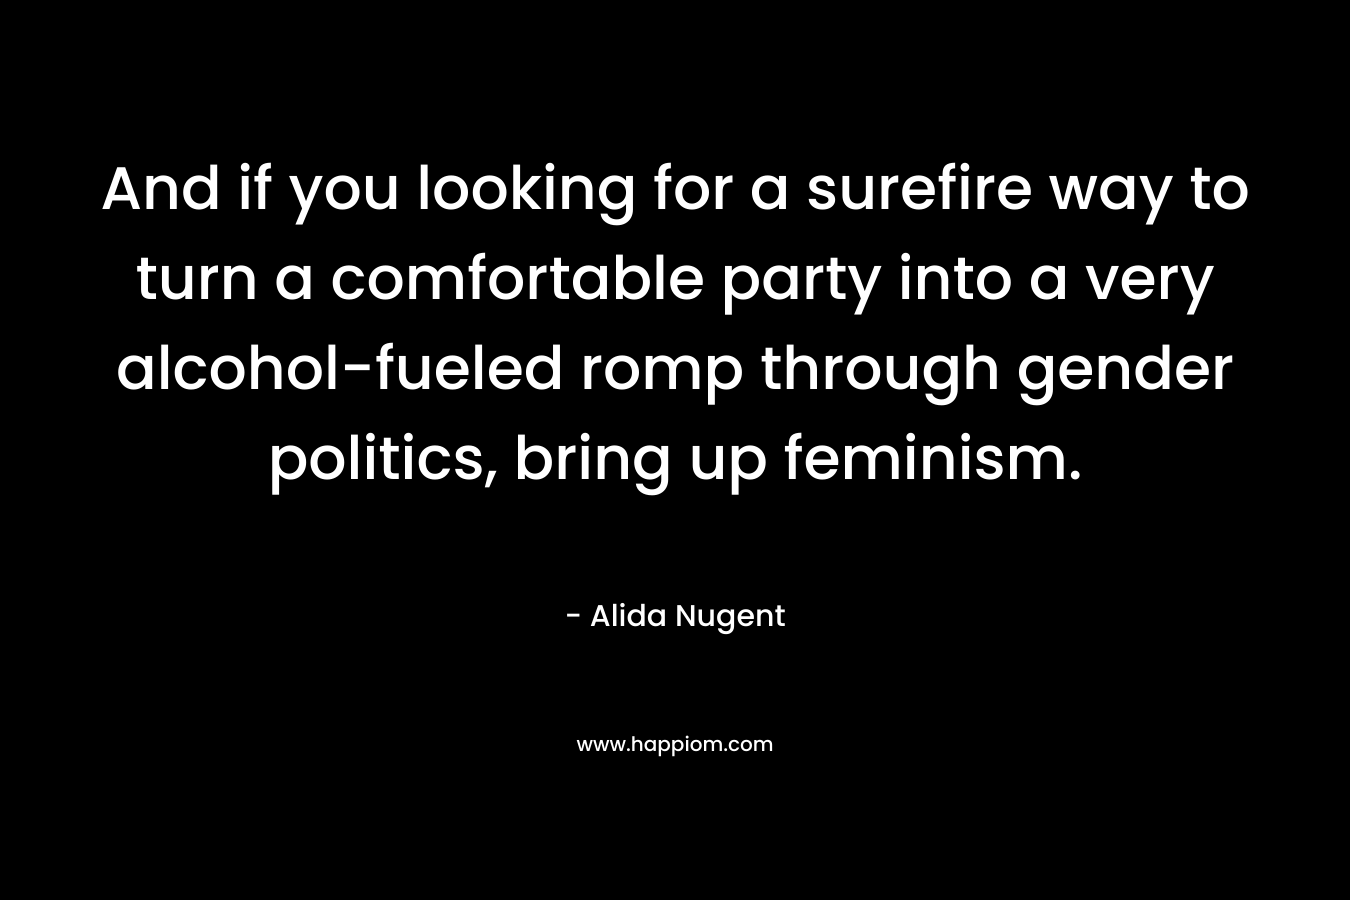 And if you looking for a surefire way to turn a comfortable party into a very alcohol-fueled romp through gender politics, bring up feminism.